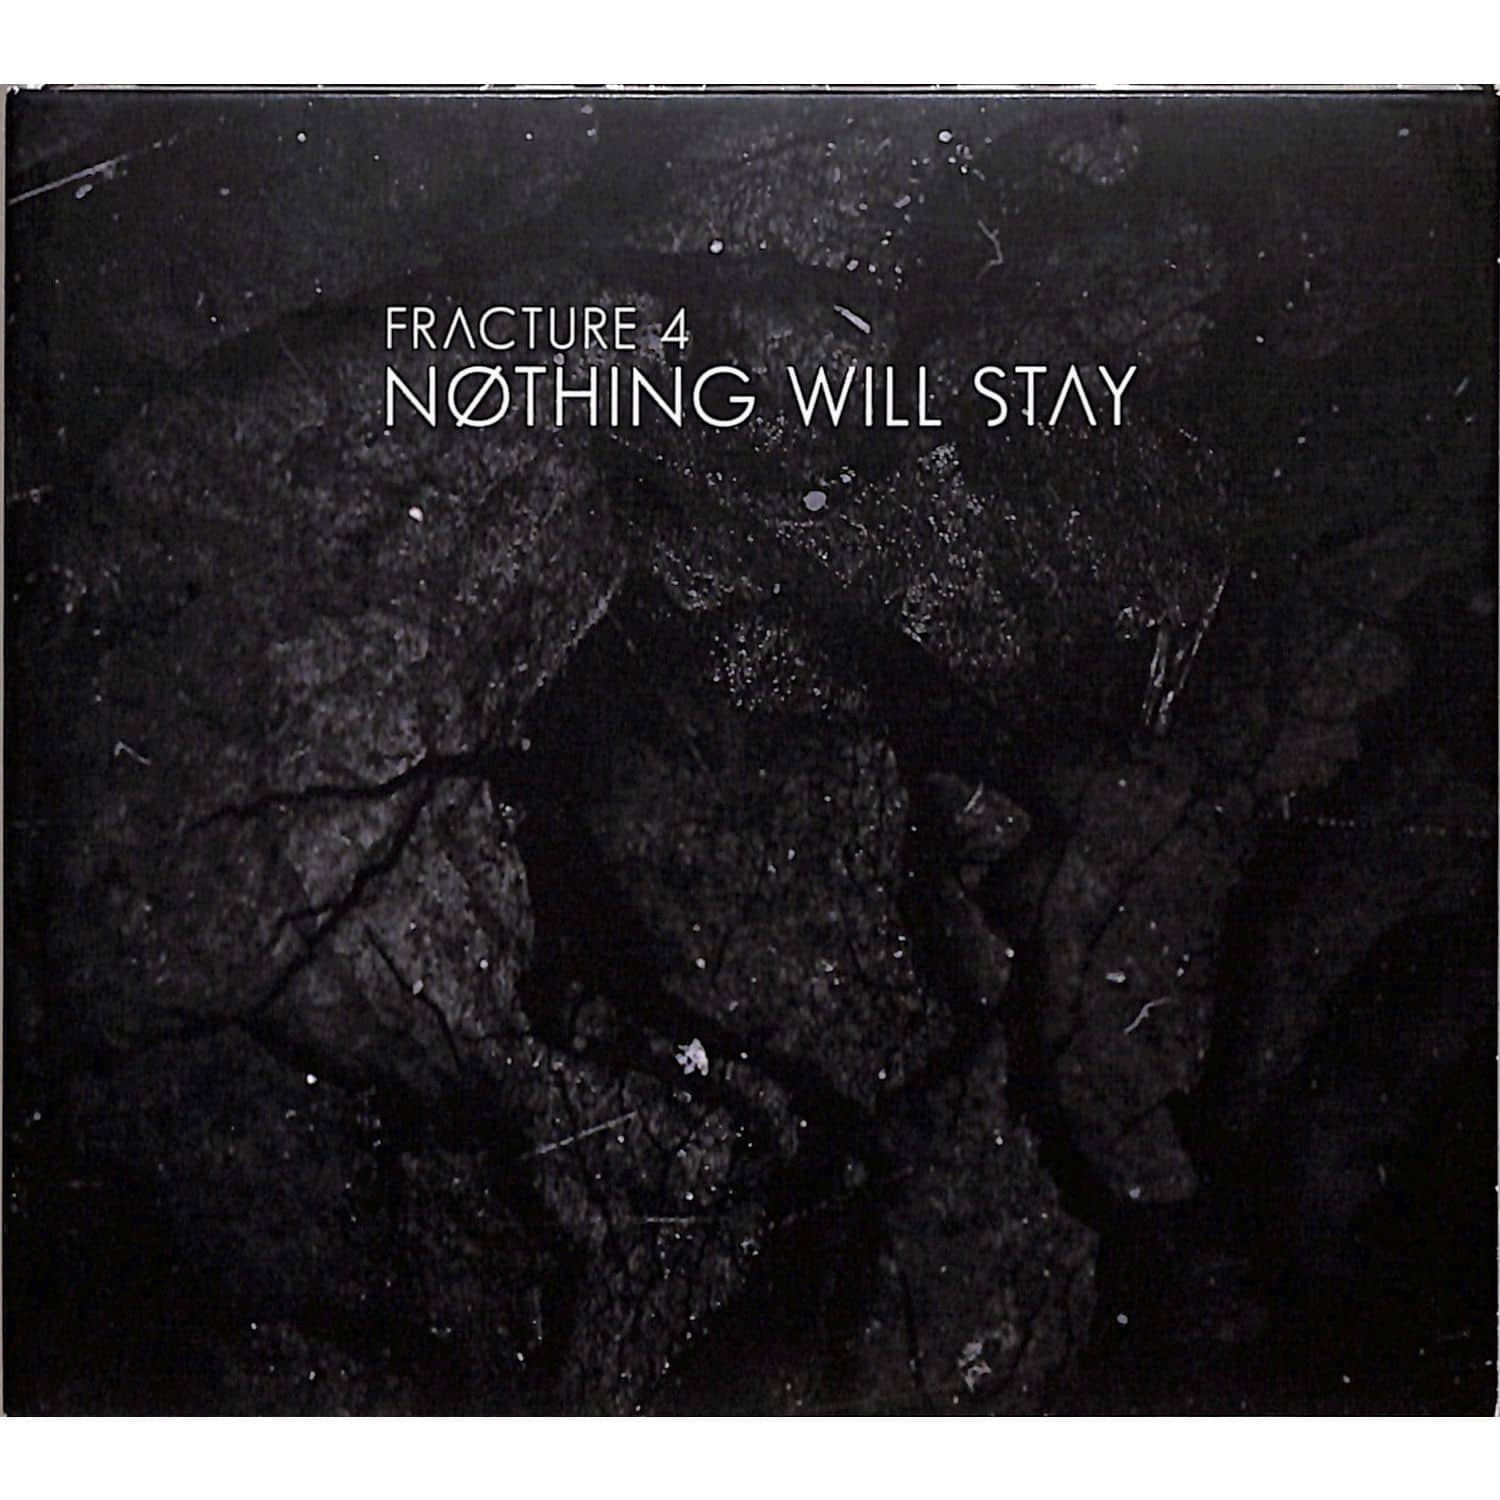 Fracture 4 - NOTHING WILL STAY 